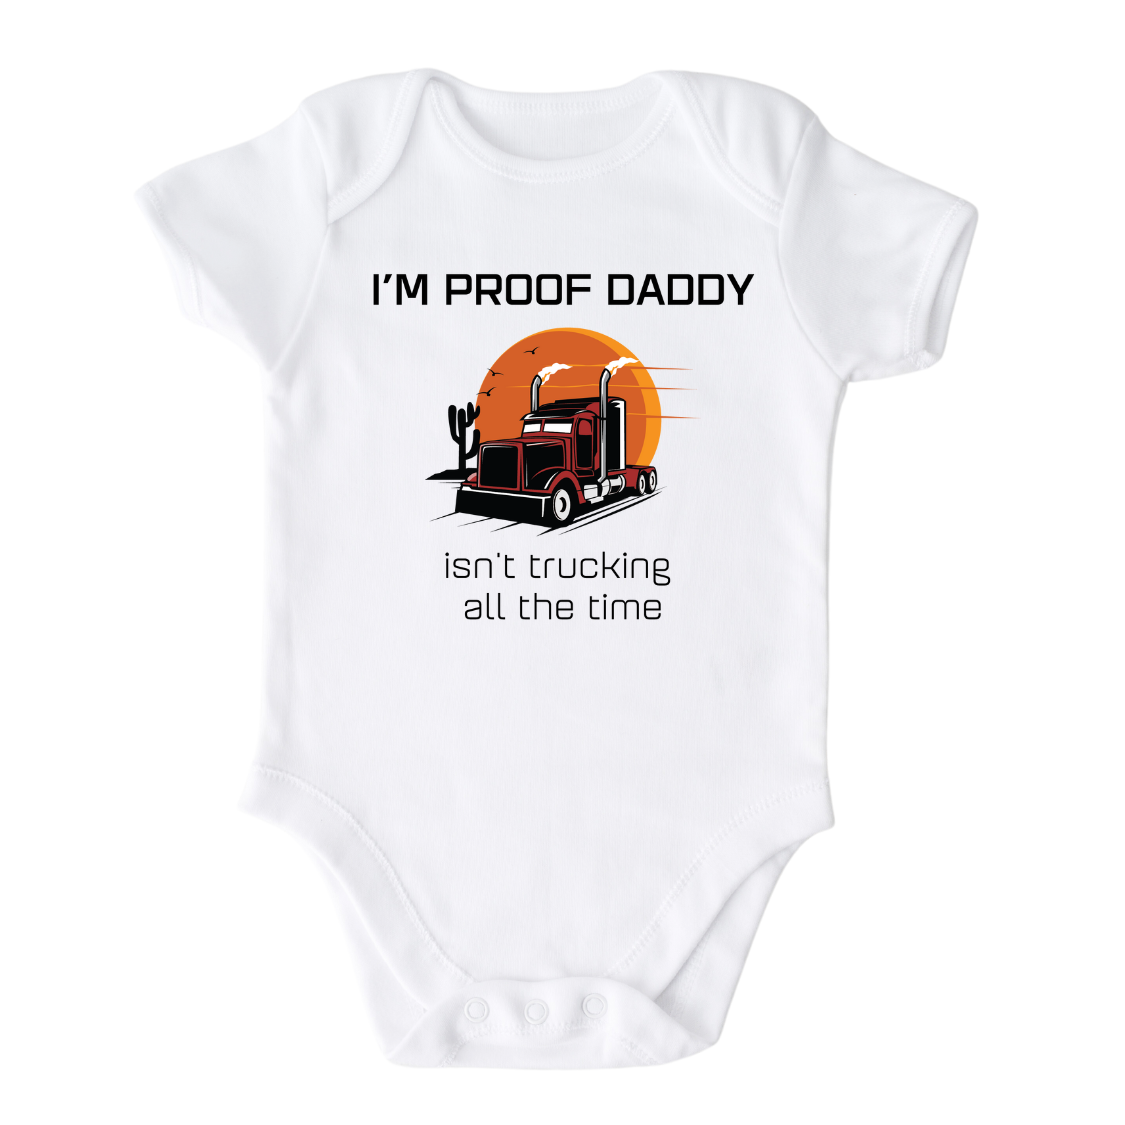 Kids Shirt Baby Onesie® Trucking Cute Baby Clothes for Baby Outfit Newborn Gift for Dad